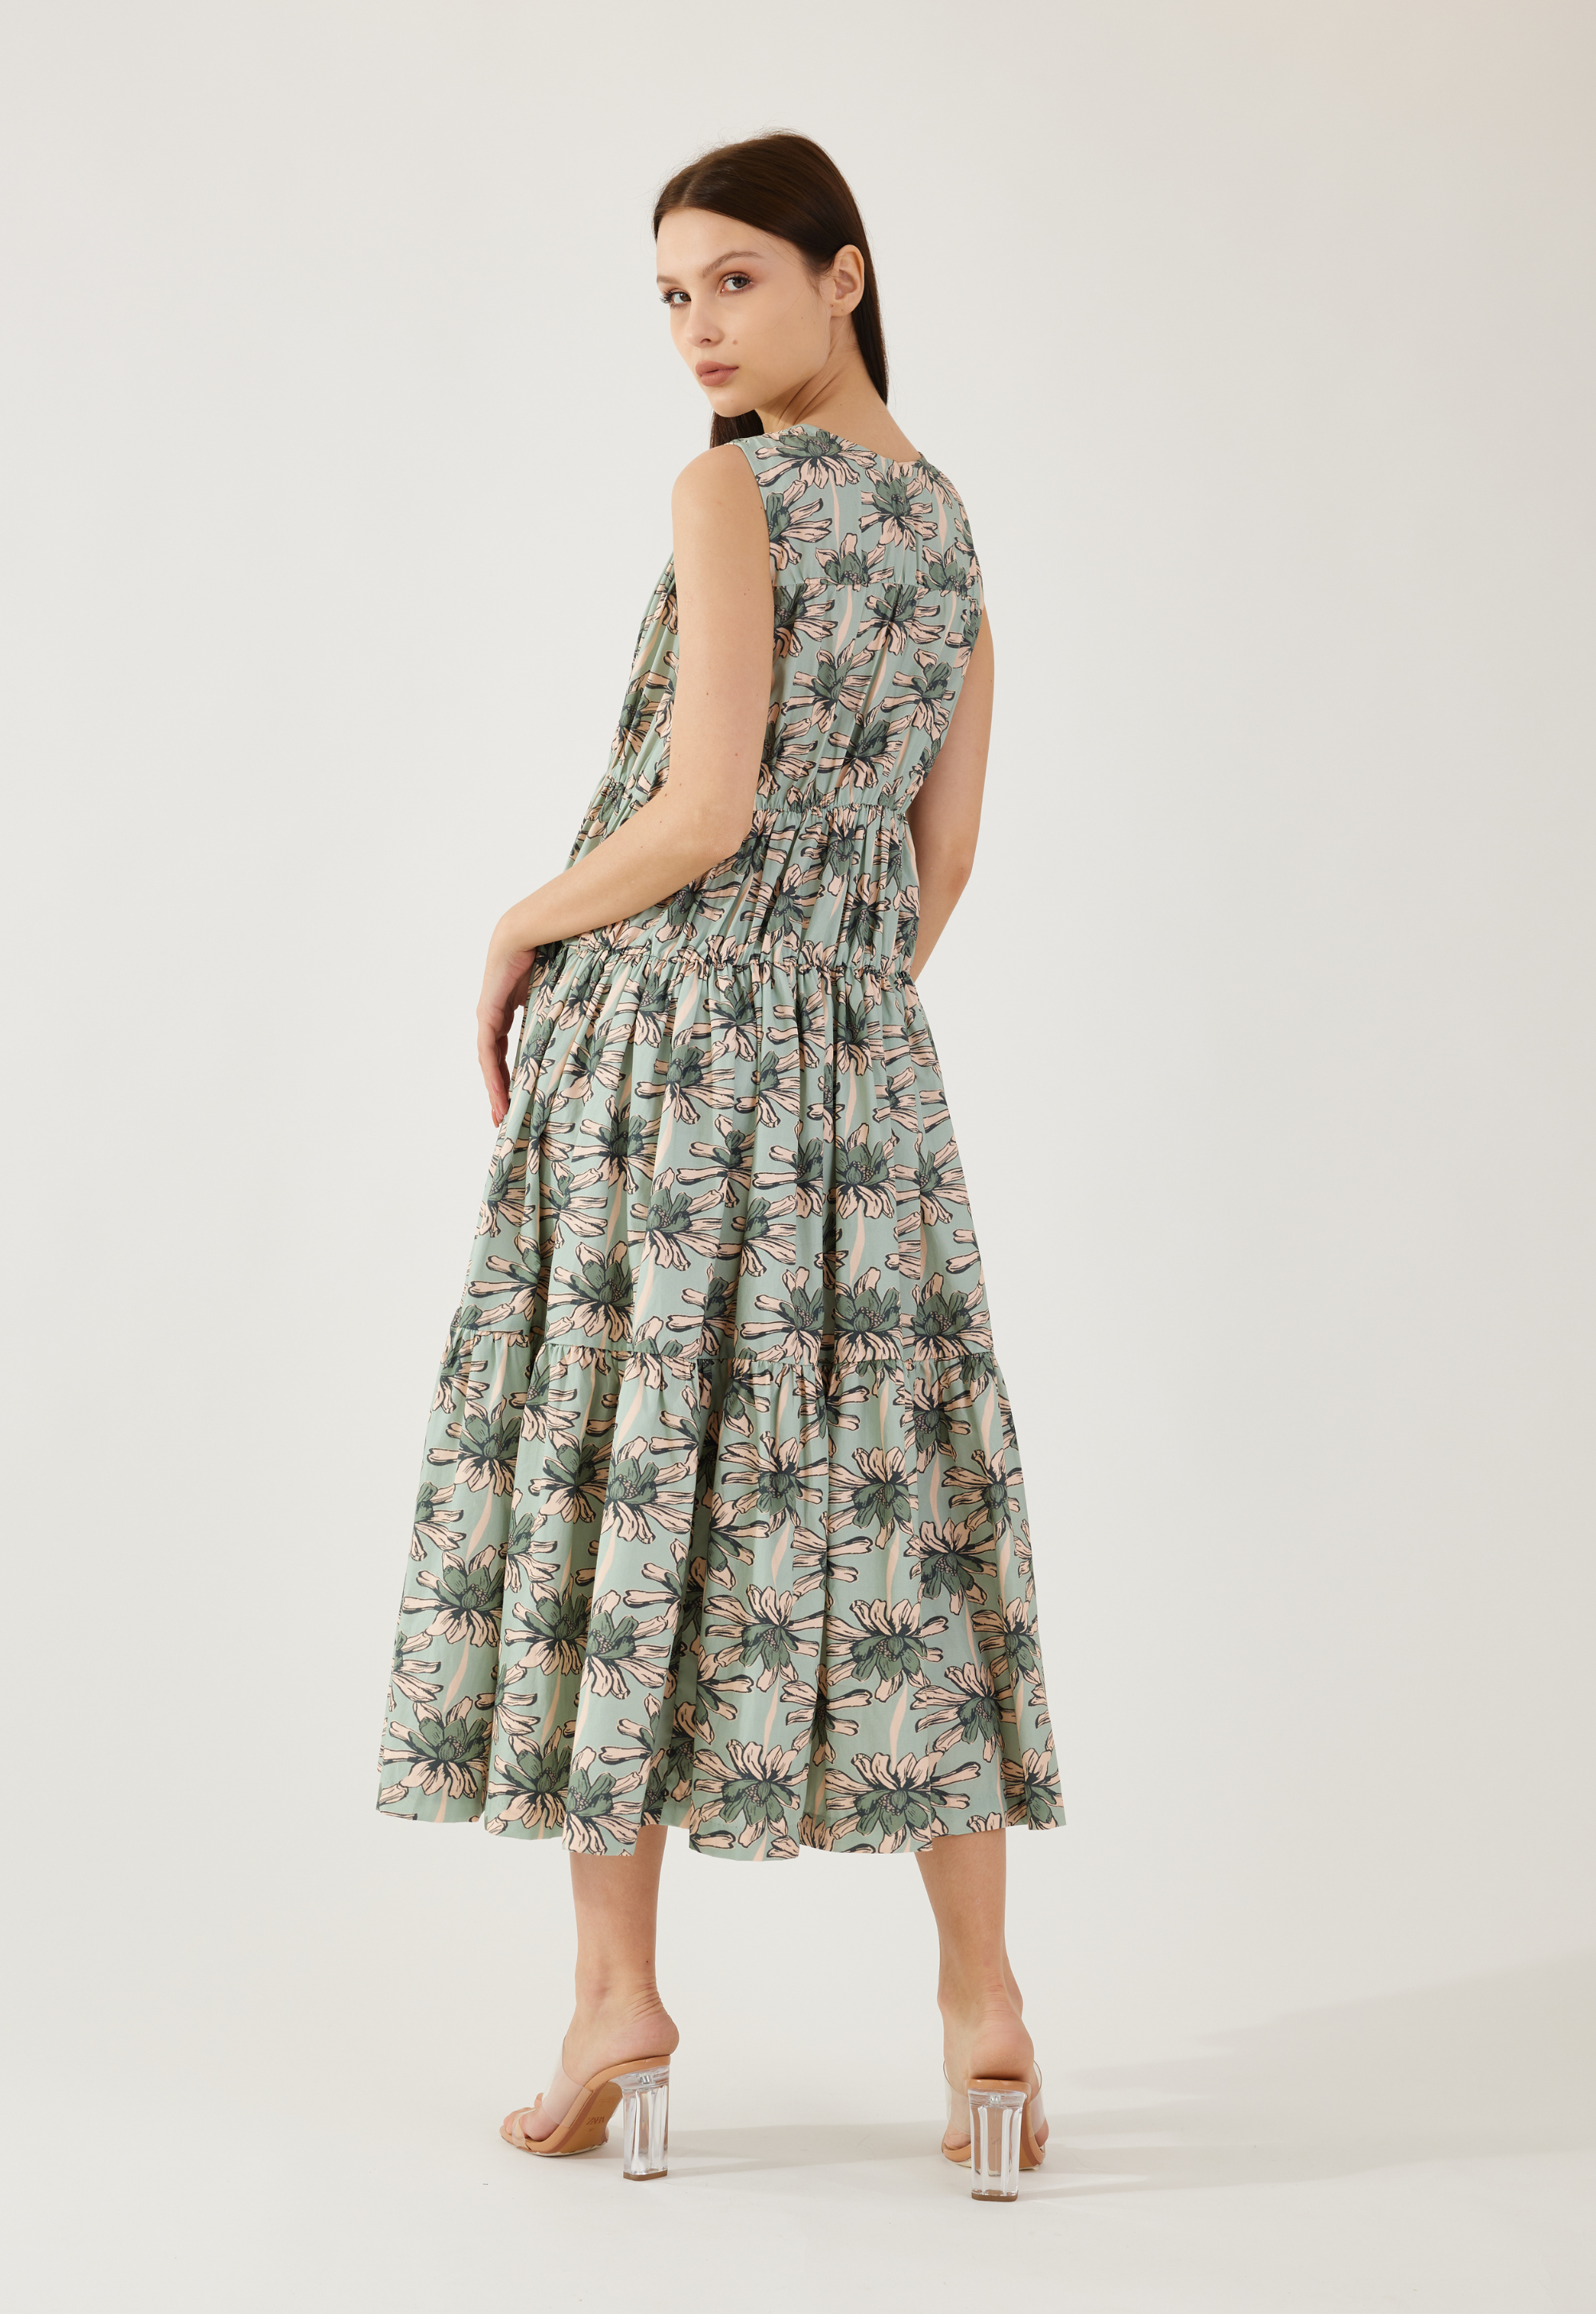 Olive and Green floral sleeveless midi dress